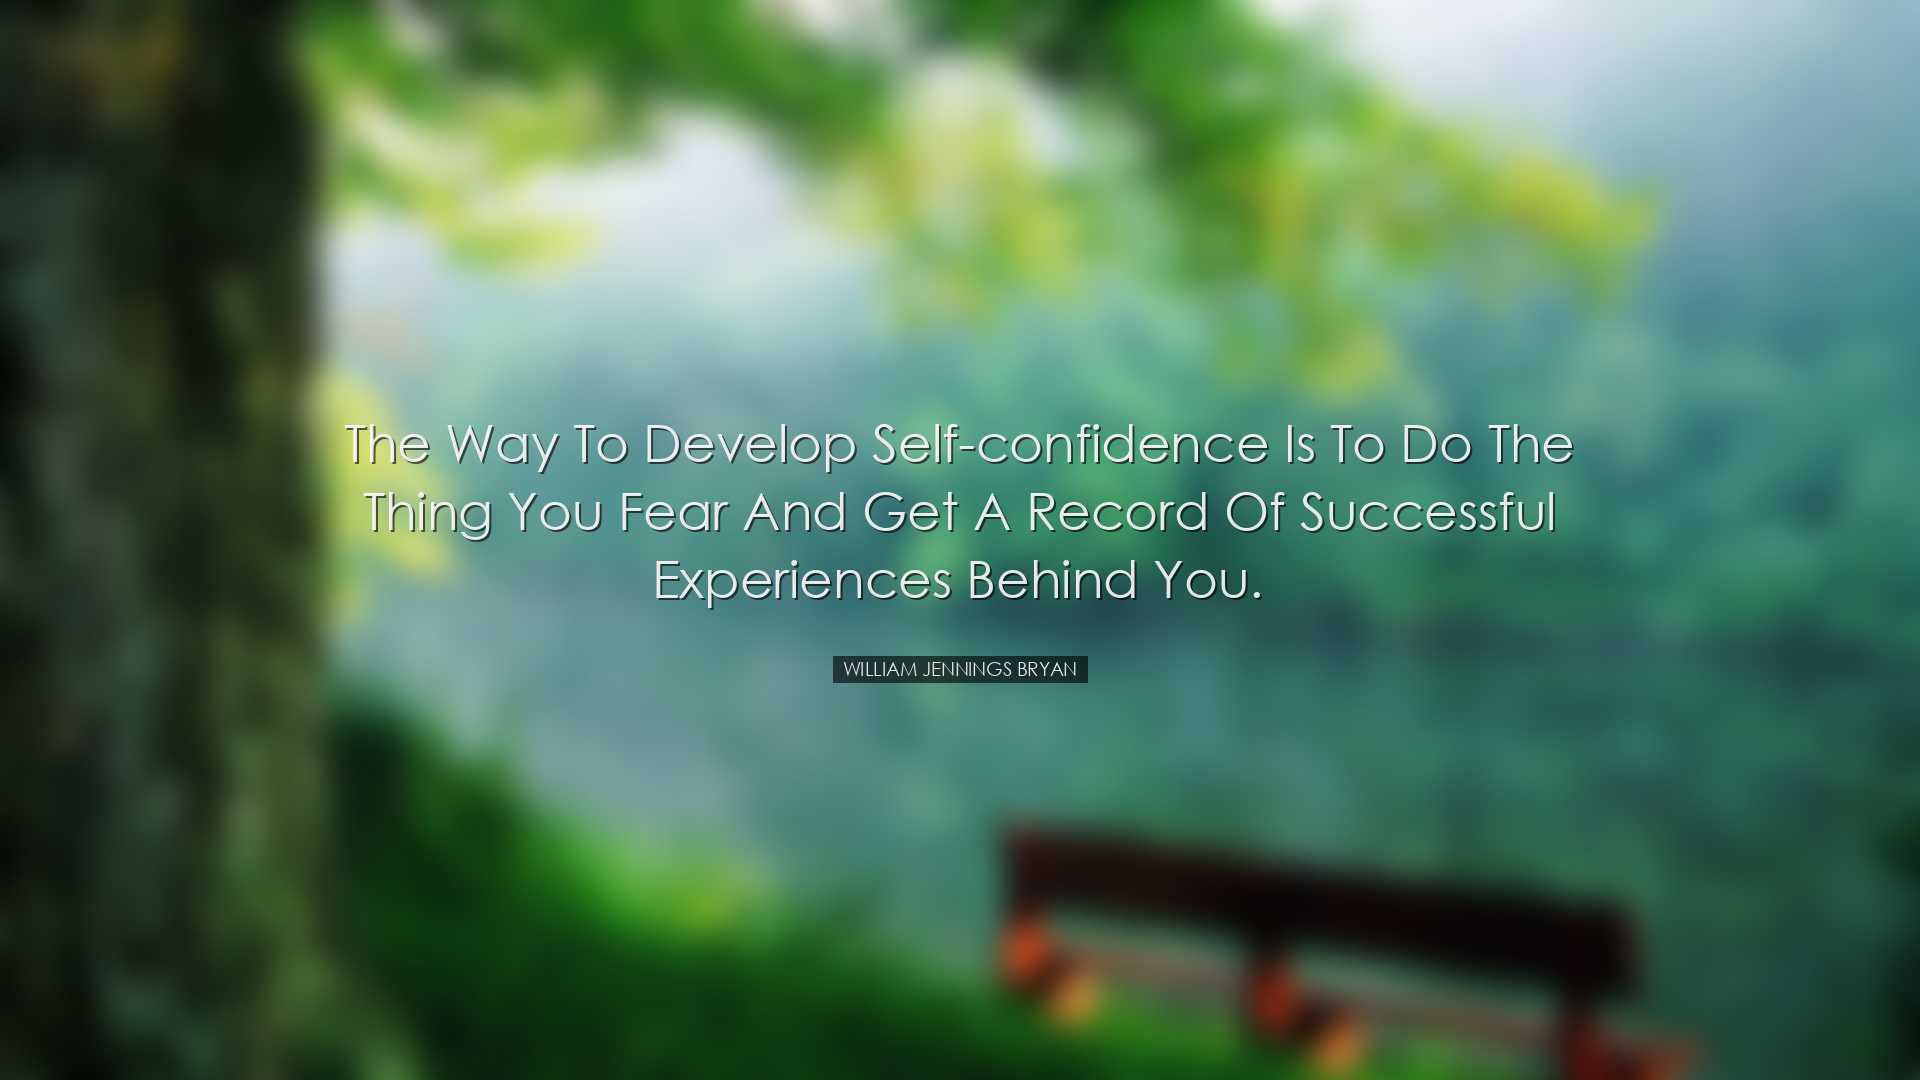 The way to develop self-confidence is to do the thing you fear and